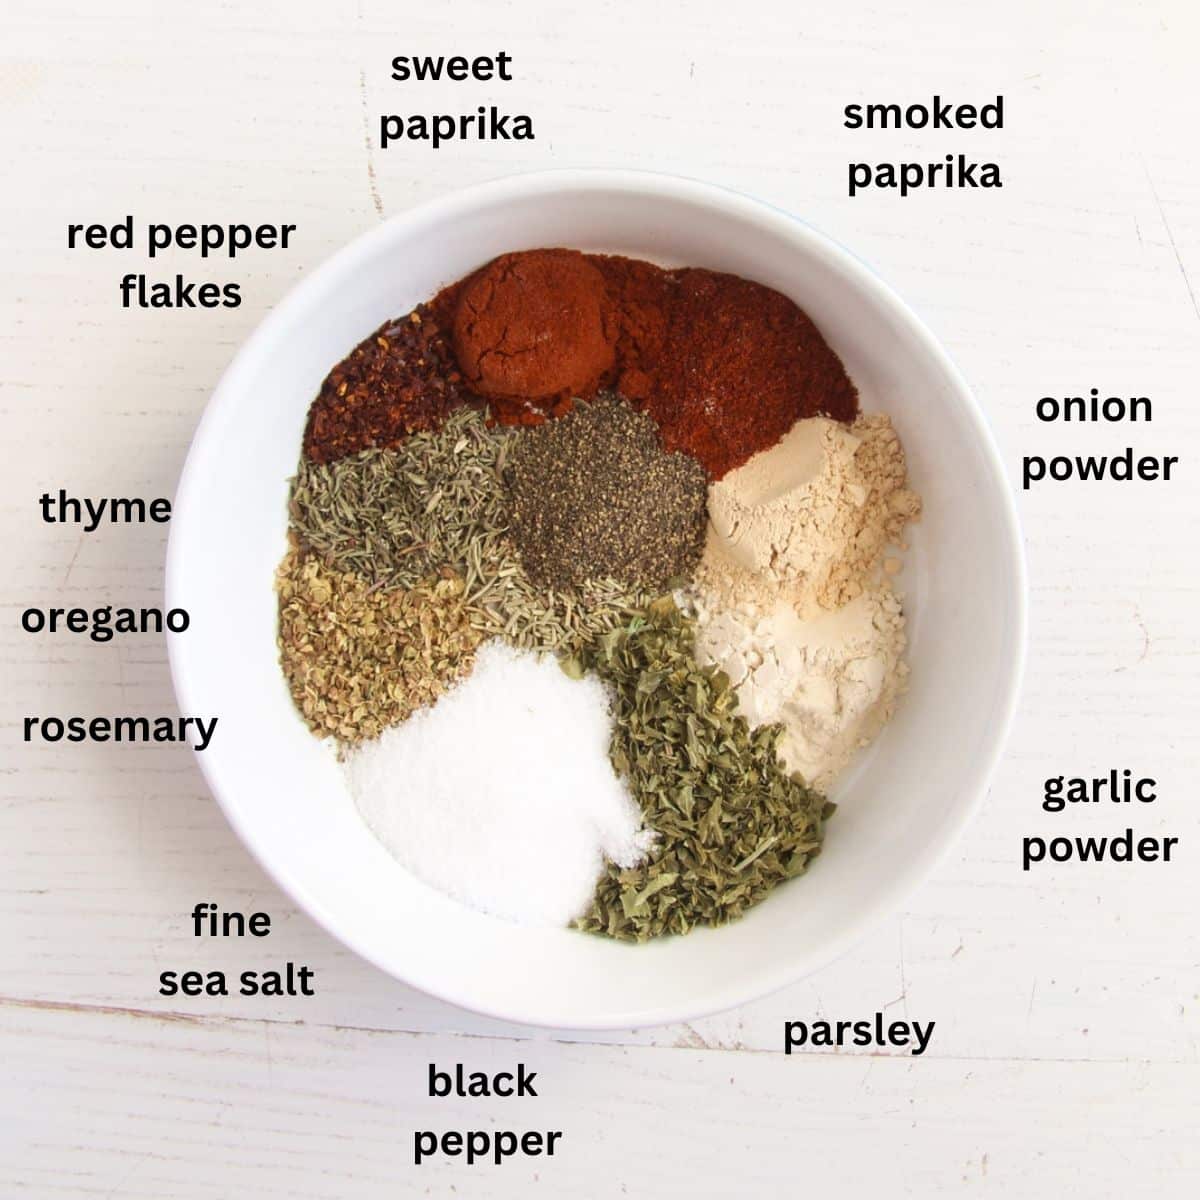 listed spices needed for making seasoning for ground beef.